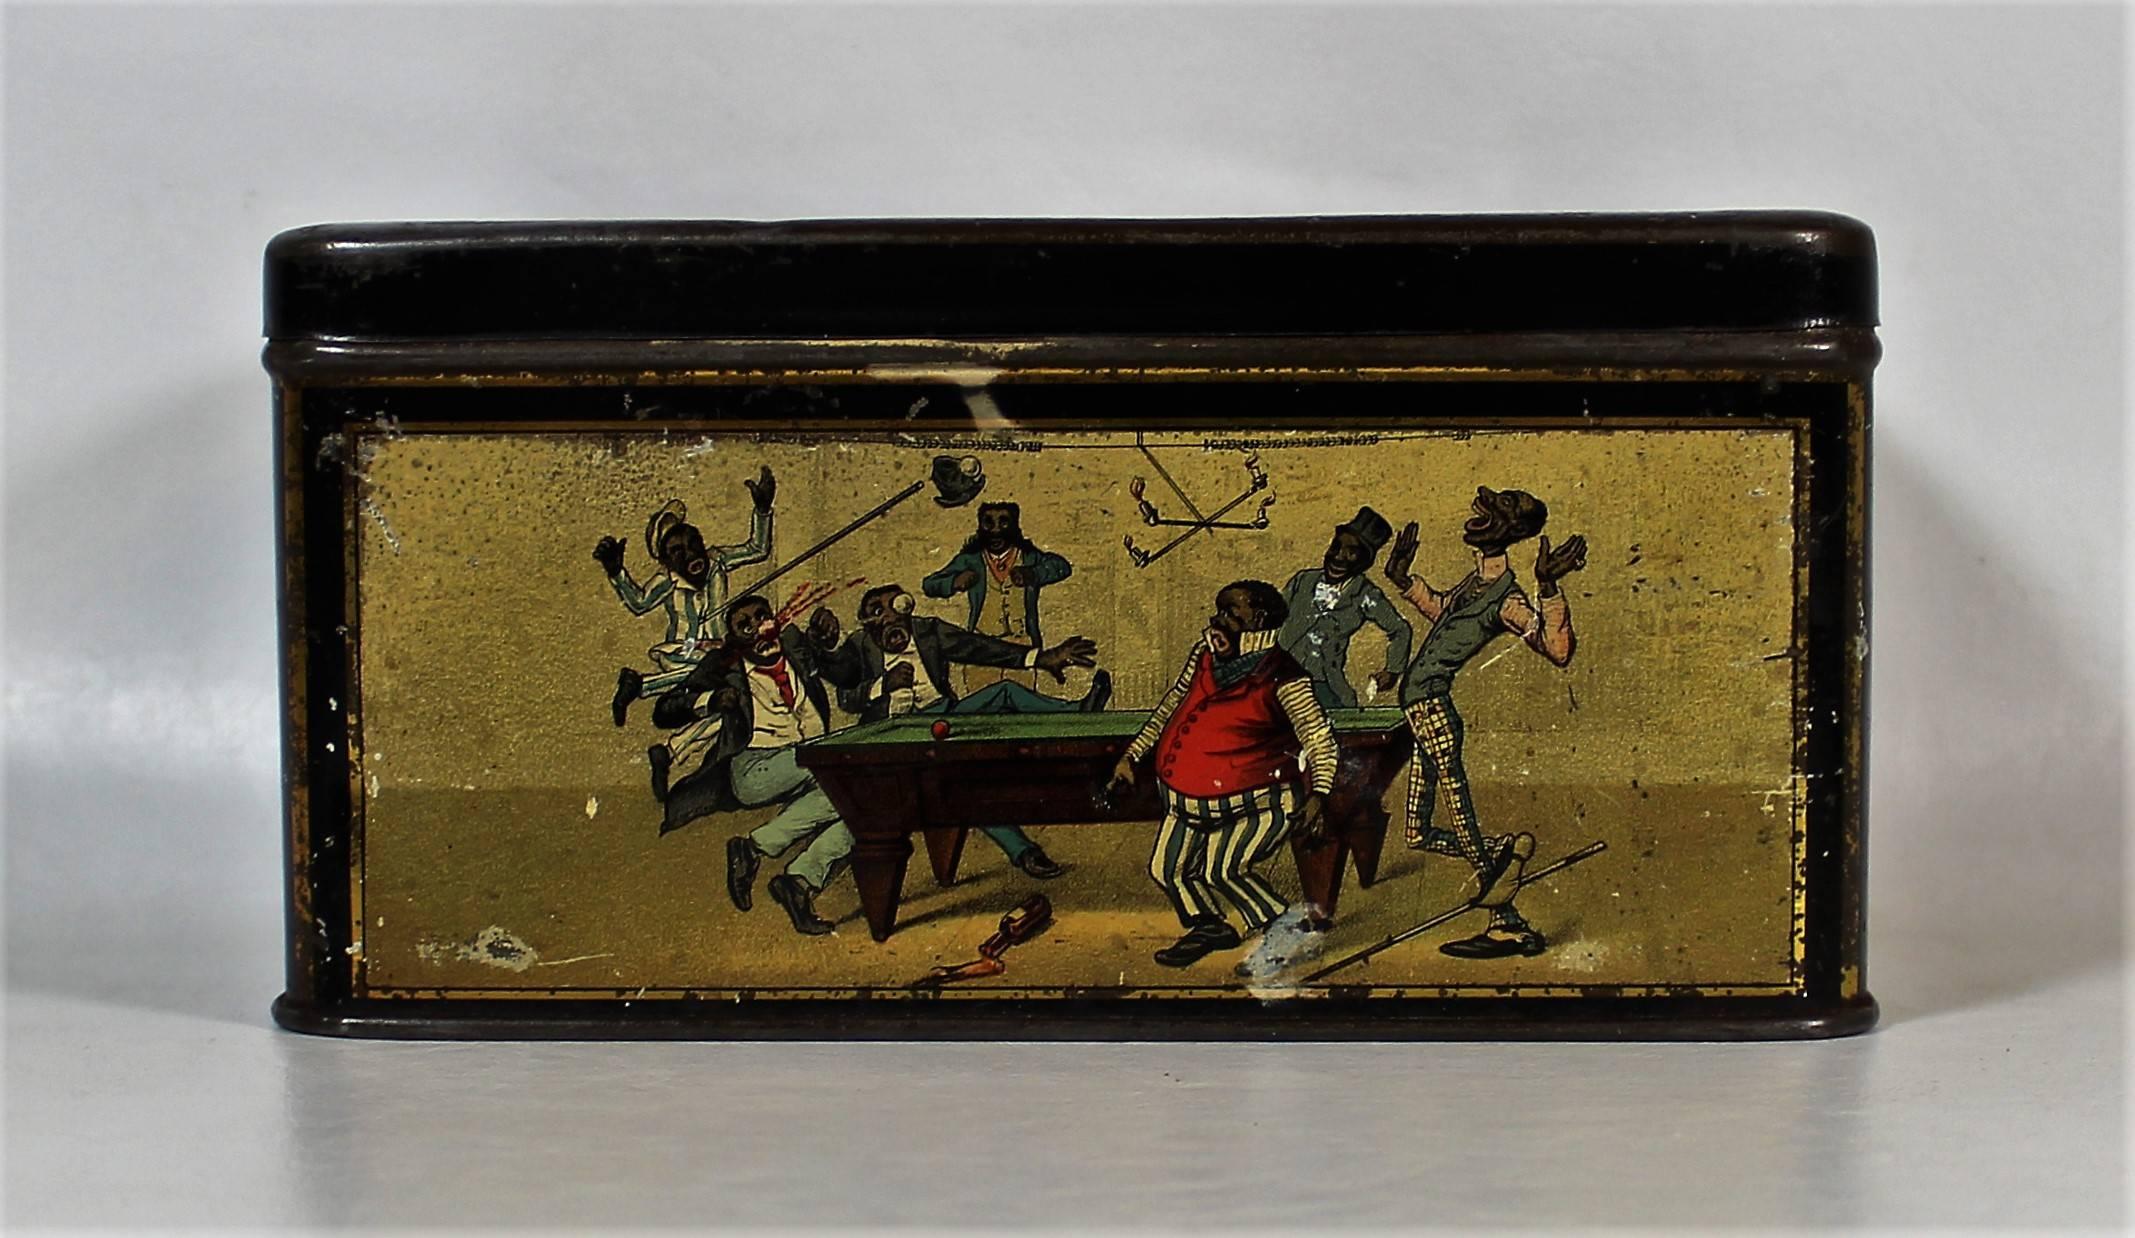 Black Americana tin box for Little Folk Pudding.

Lithographed tin manufactured by Numan's Blikfabrieken in Amsterdam, Holland. Features amusing 'Black Americana' themes after works by Theodore Worth. Signed in the print in the lower right “Th.